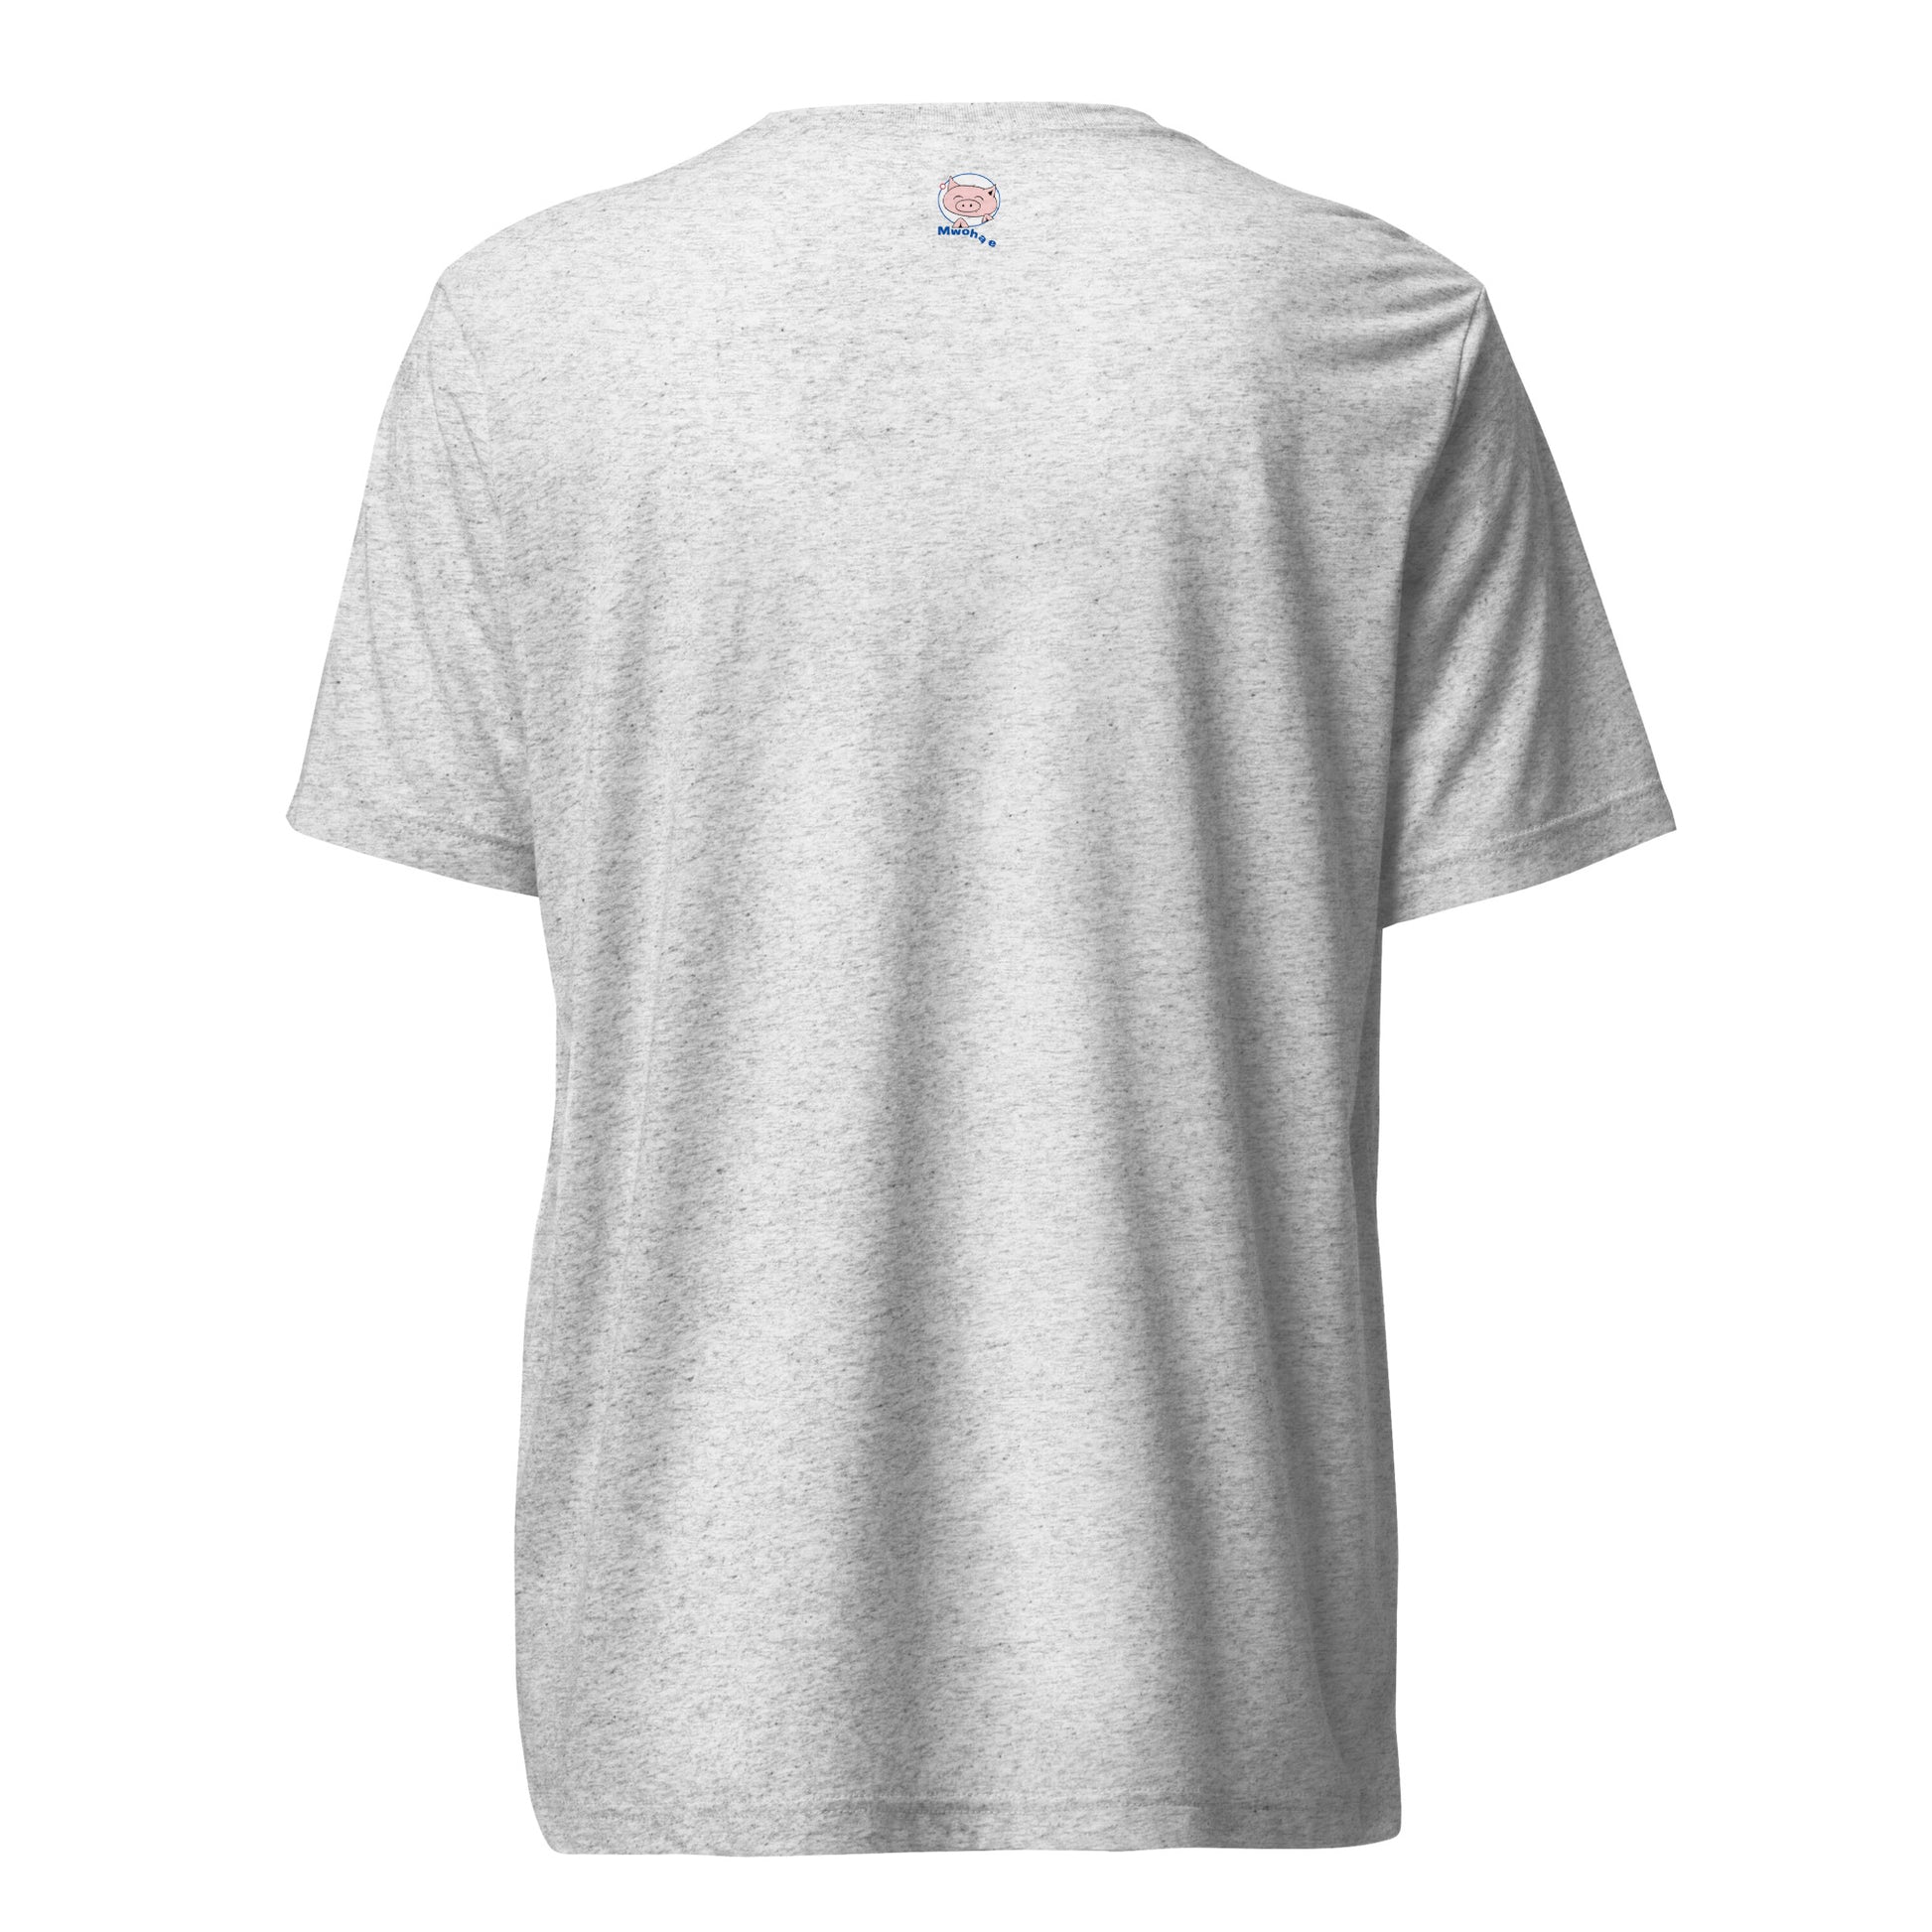 Gray extra soft T-shirt with a small Mwohae logo on the back